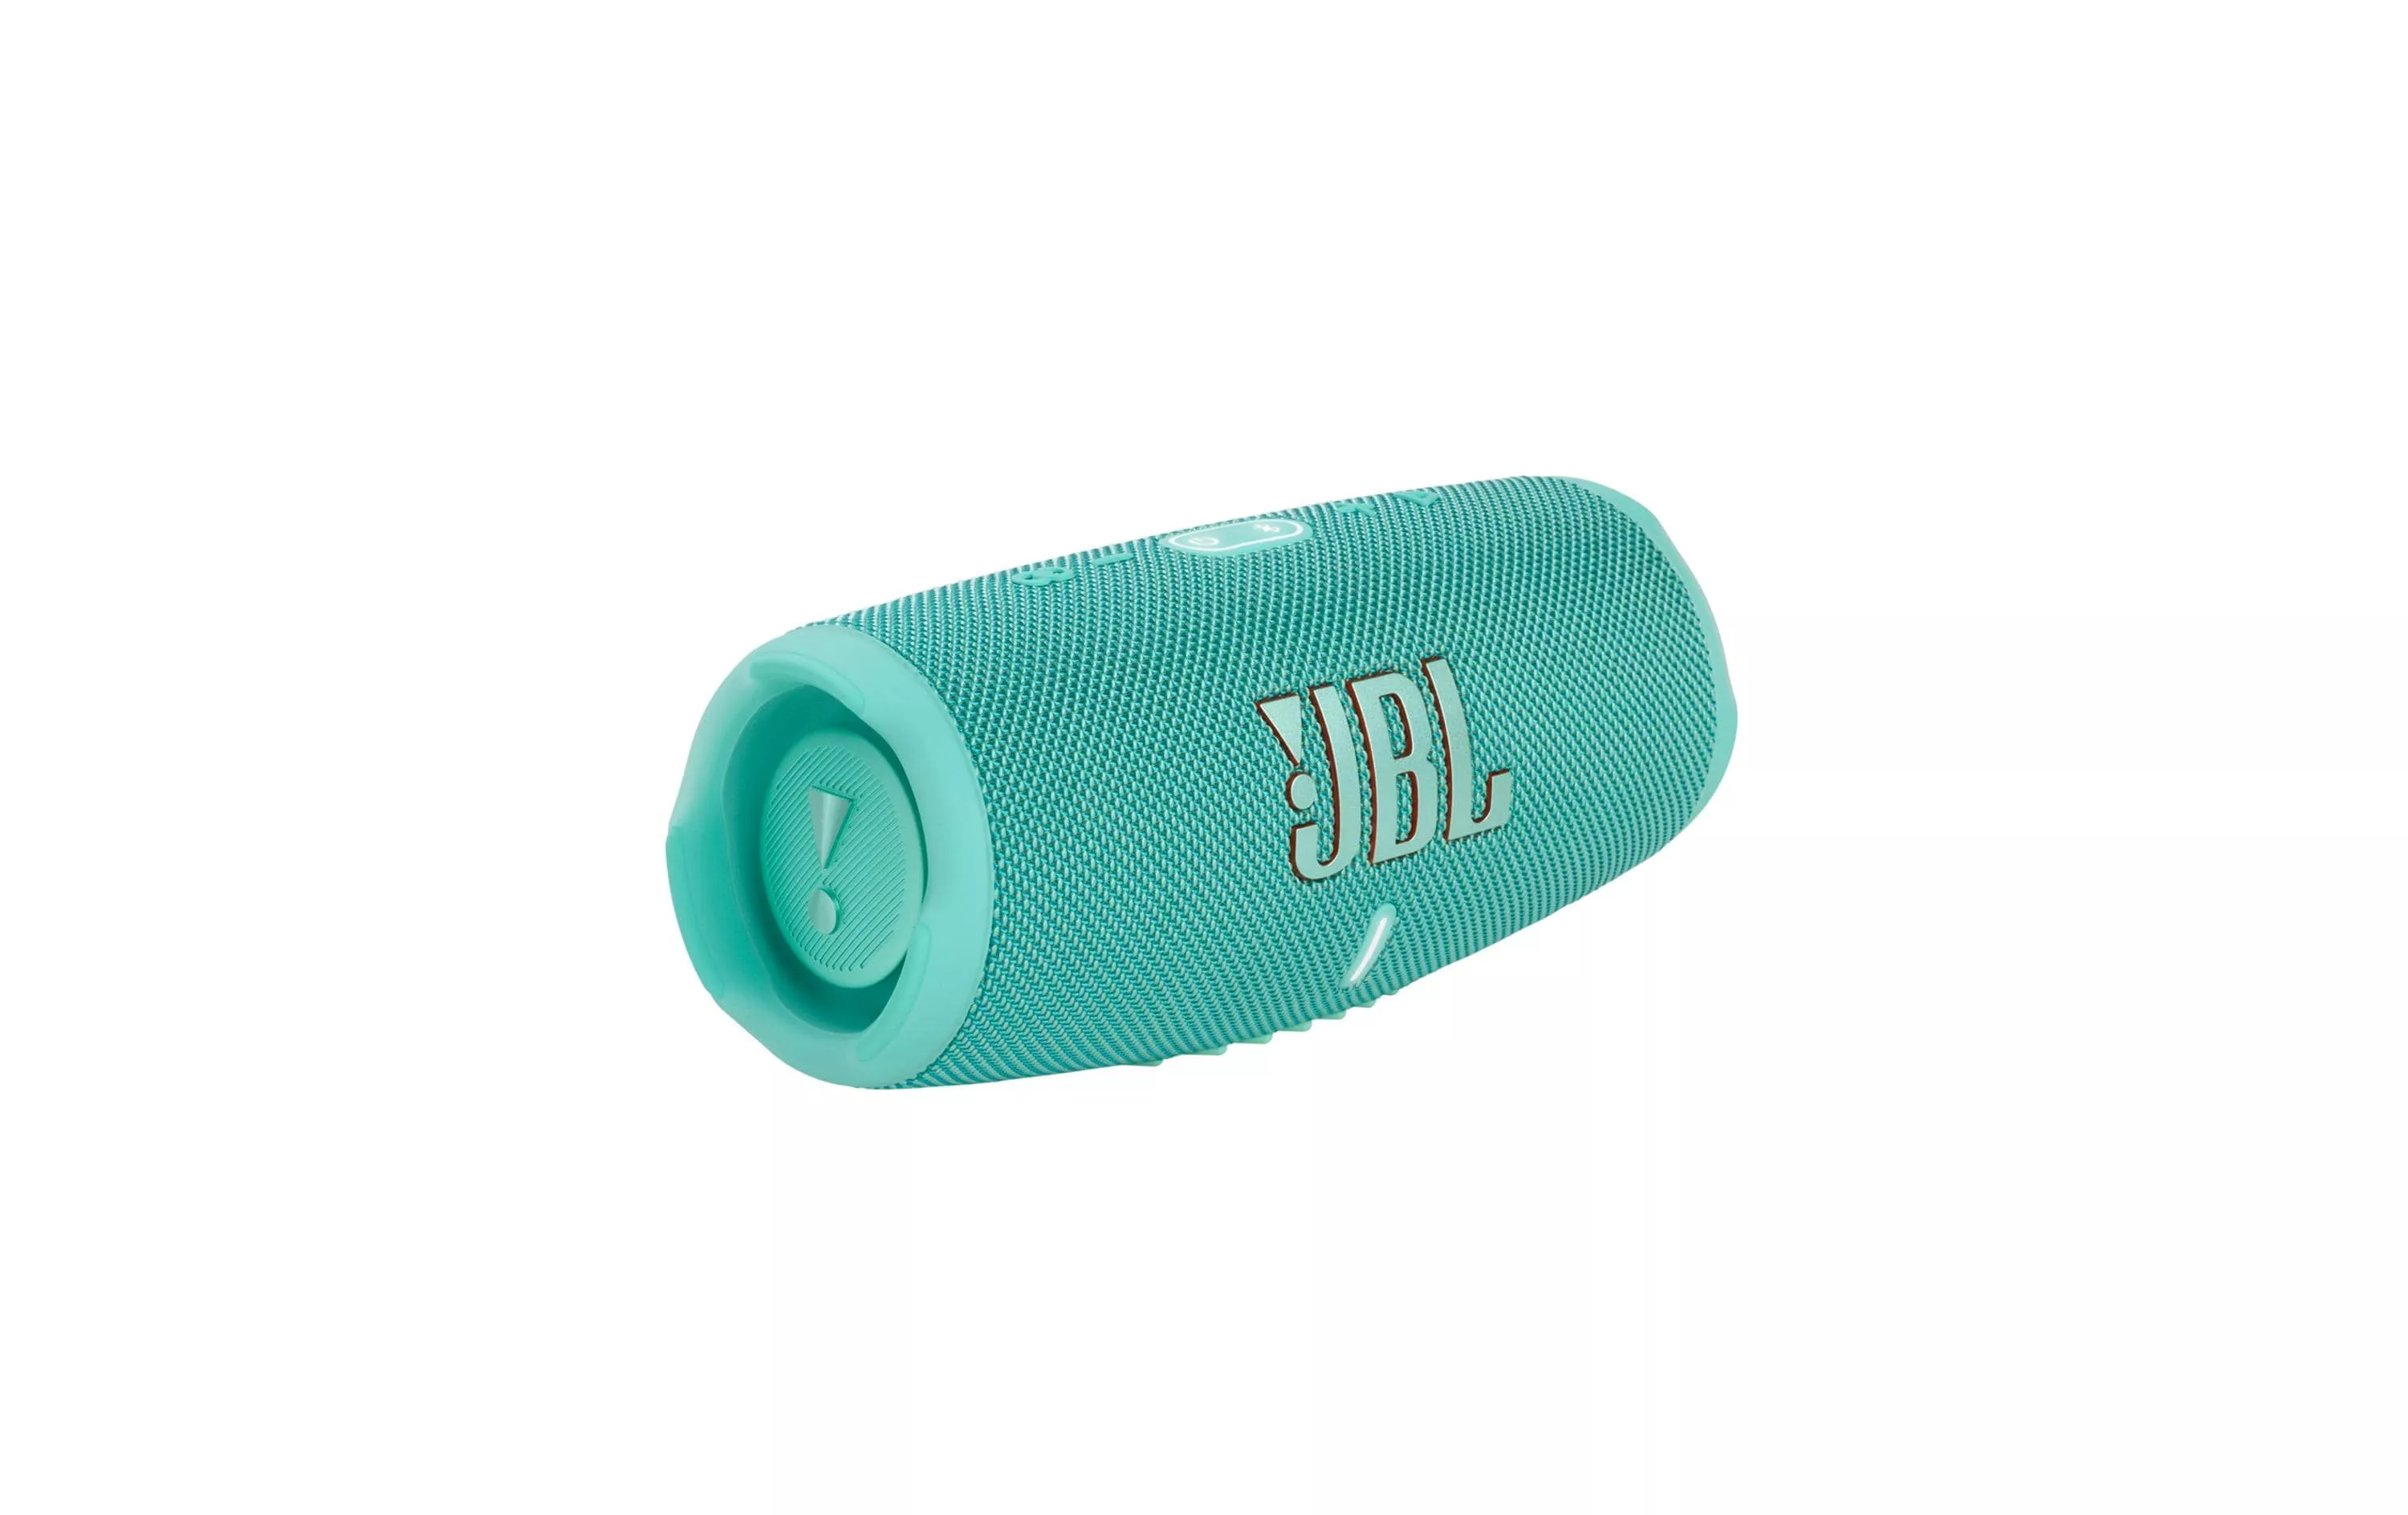 Haut-parleur Bluetooth Charge 5 Turquoise